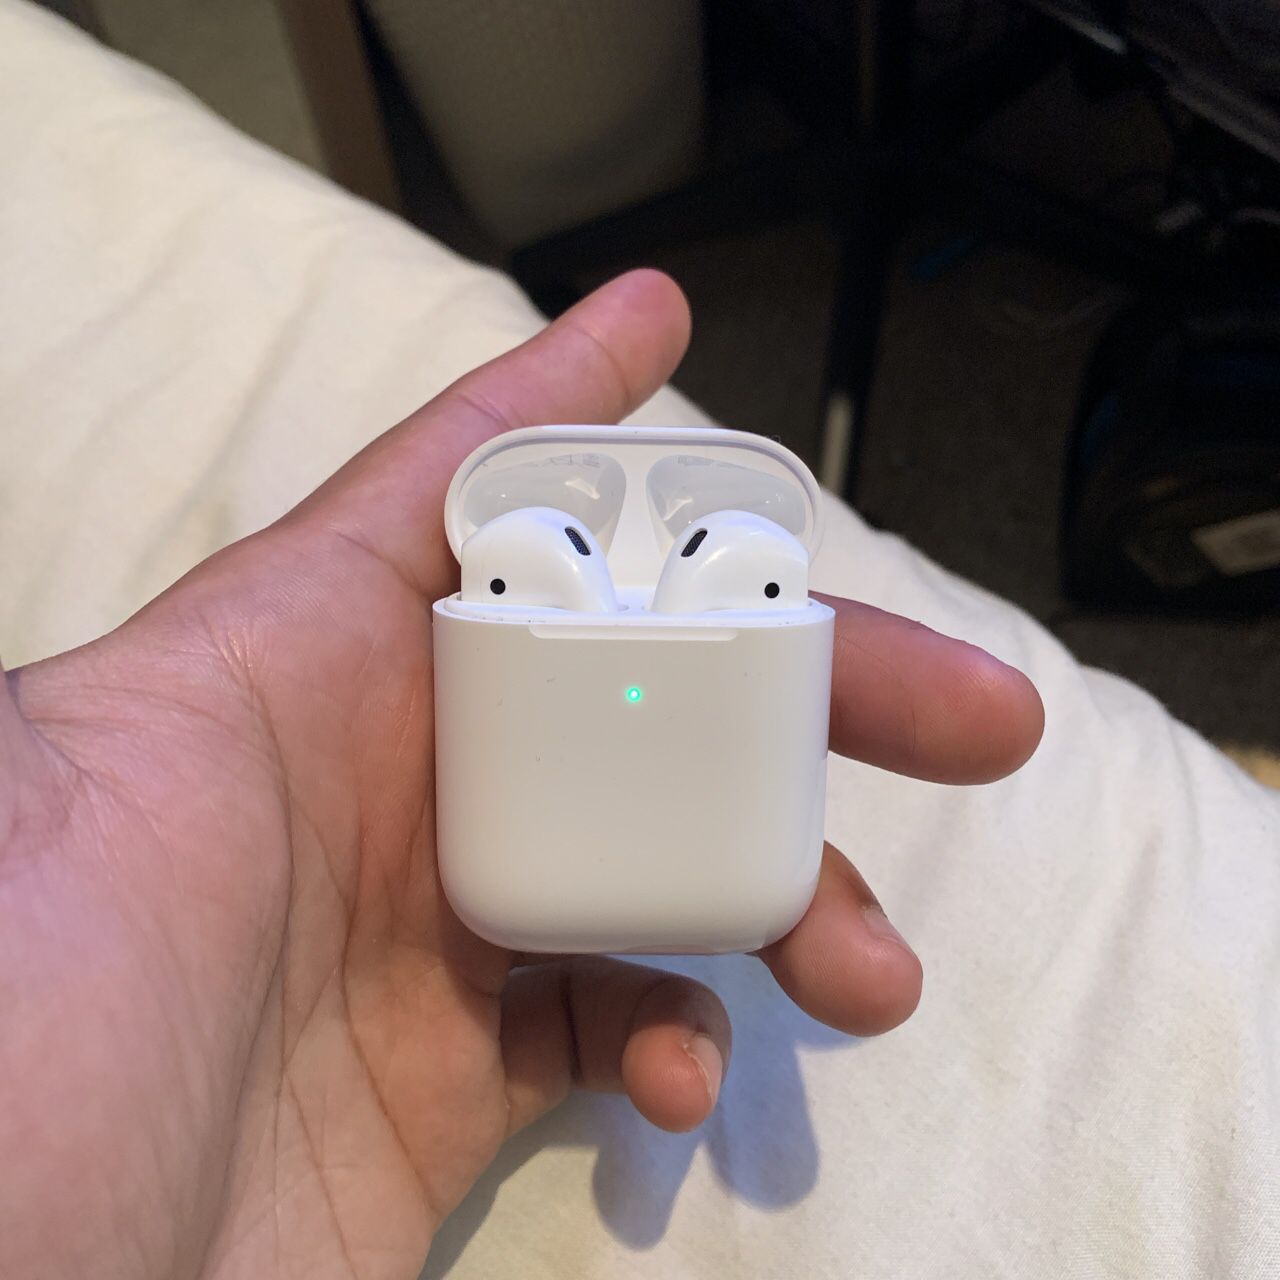 Airpods & Apple watch